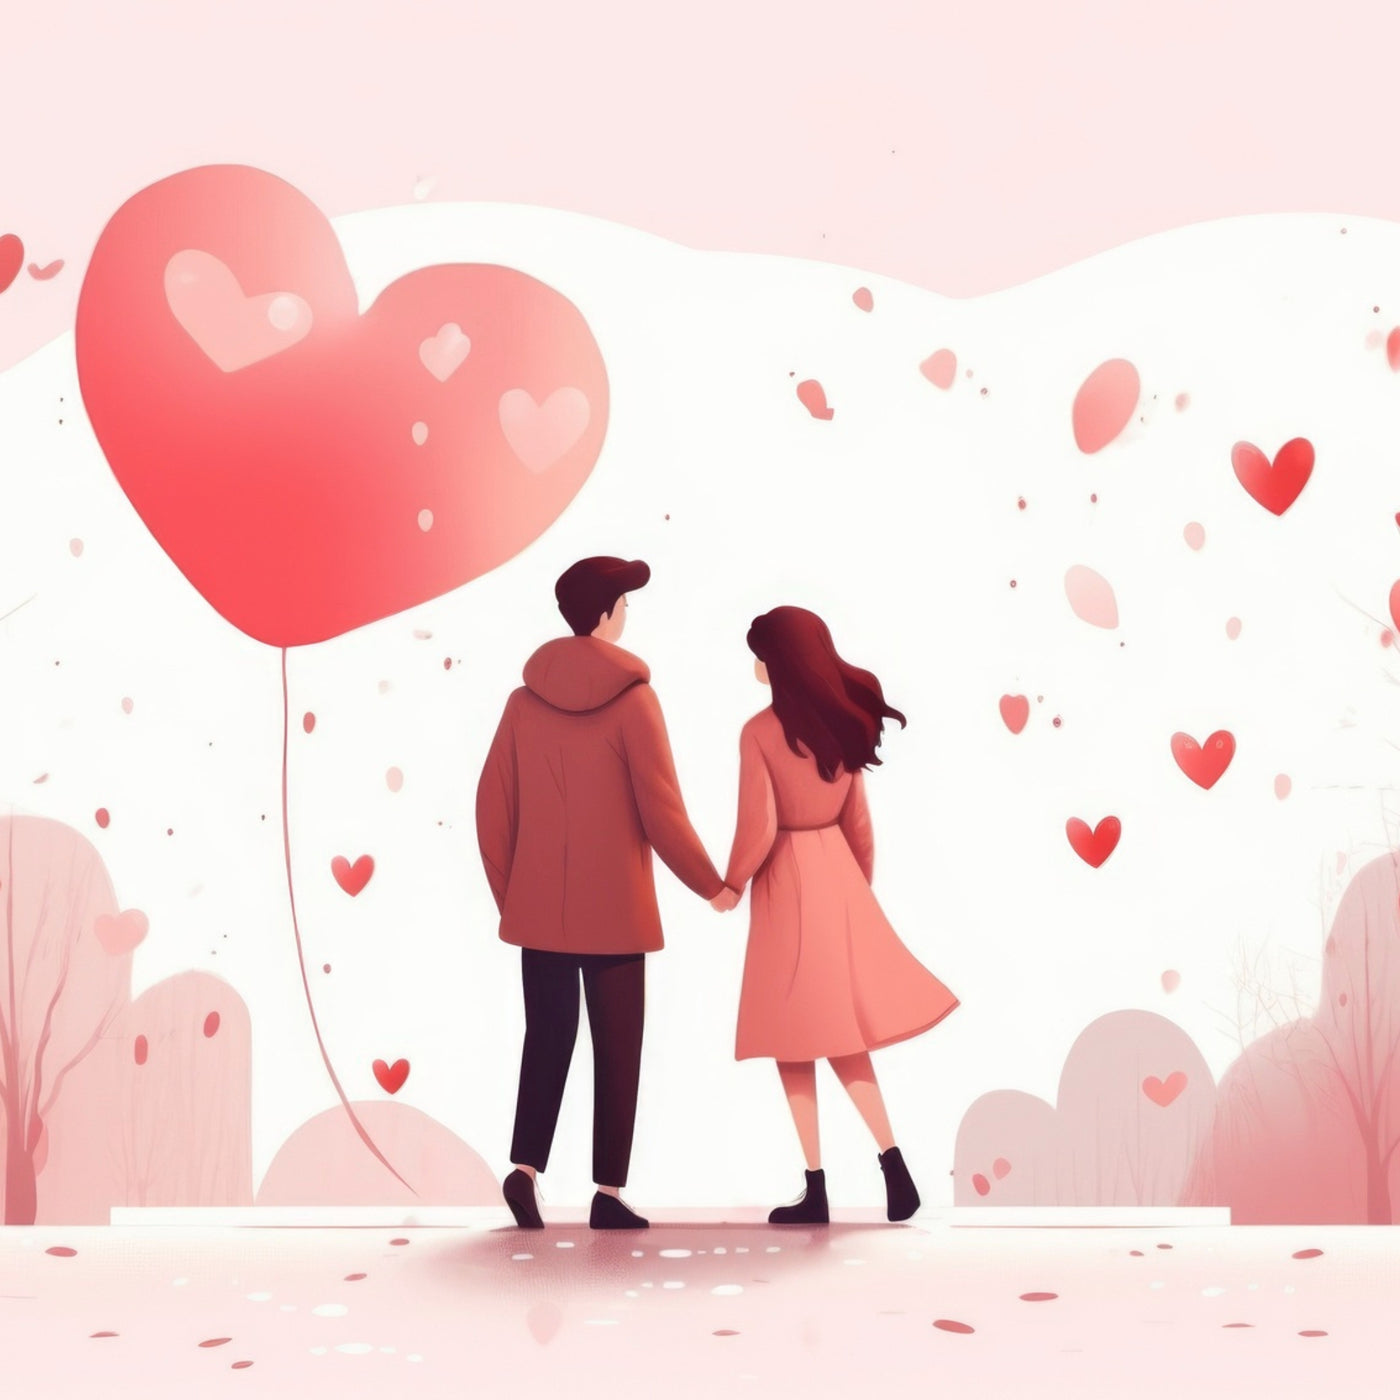 Love Quotes For Valentine's Day To Spread The Love